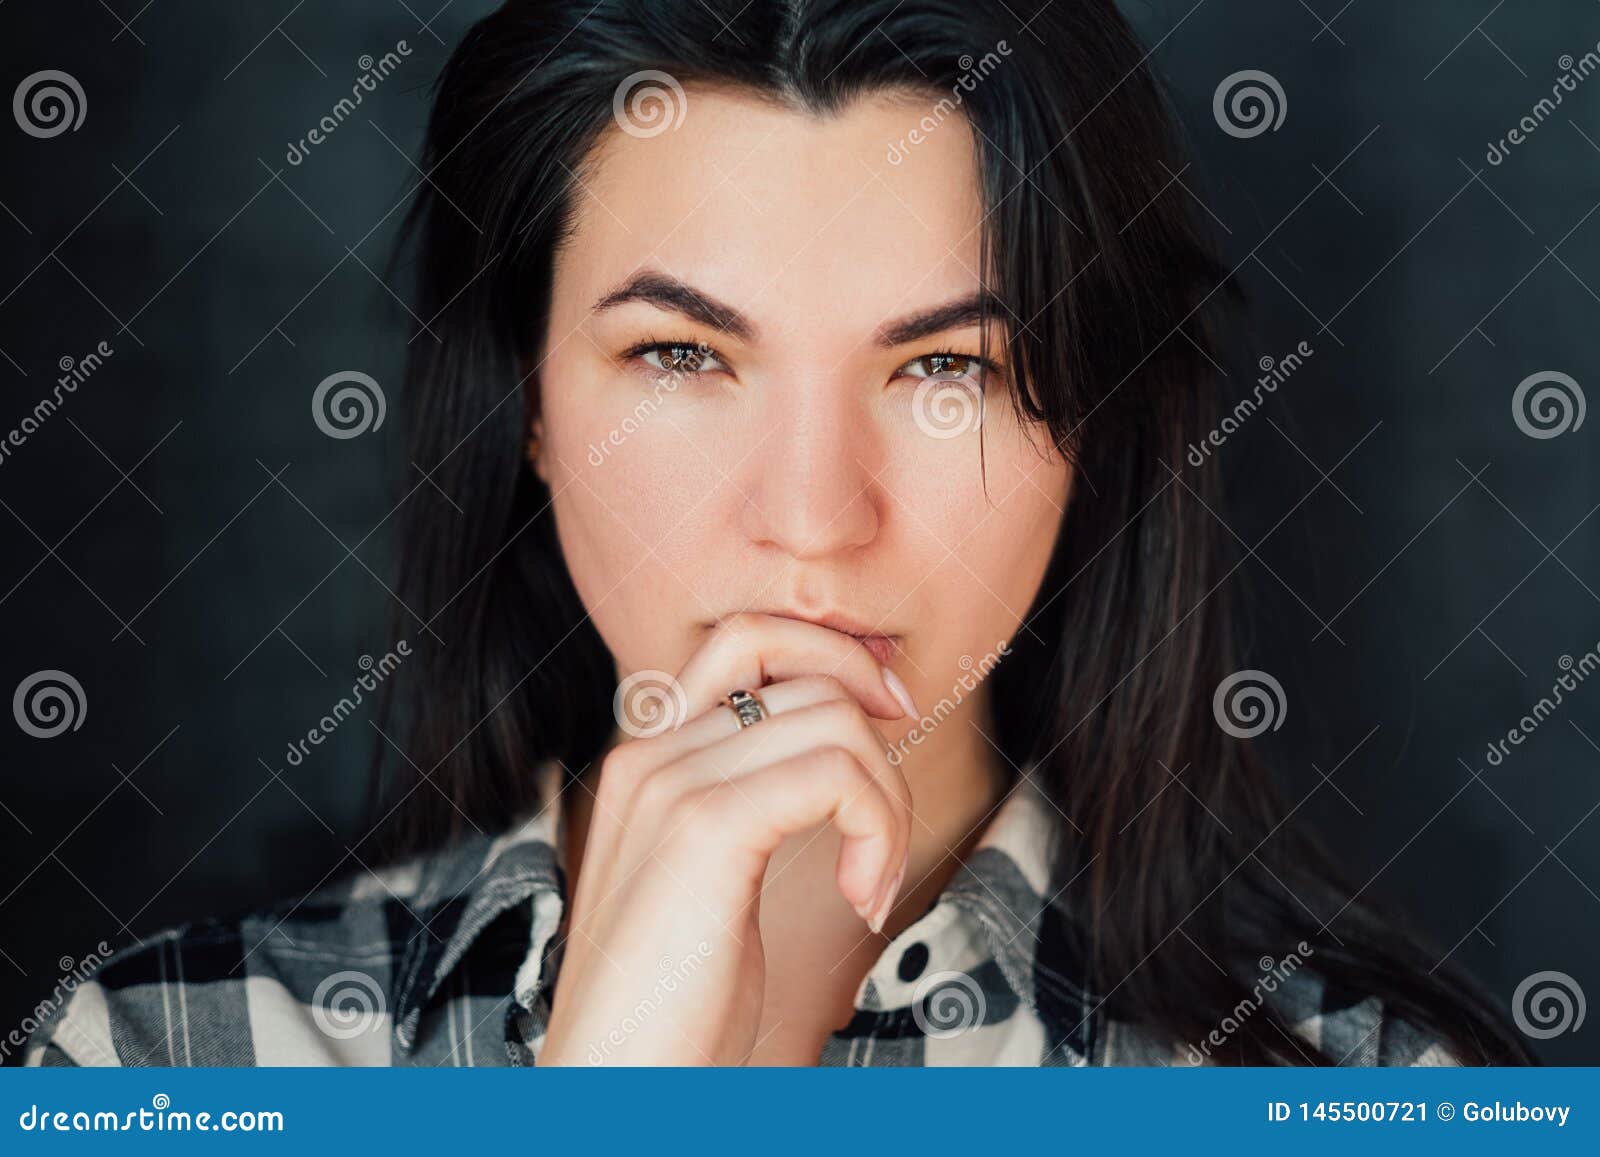 young woman speculation thoughtful decision time